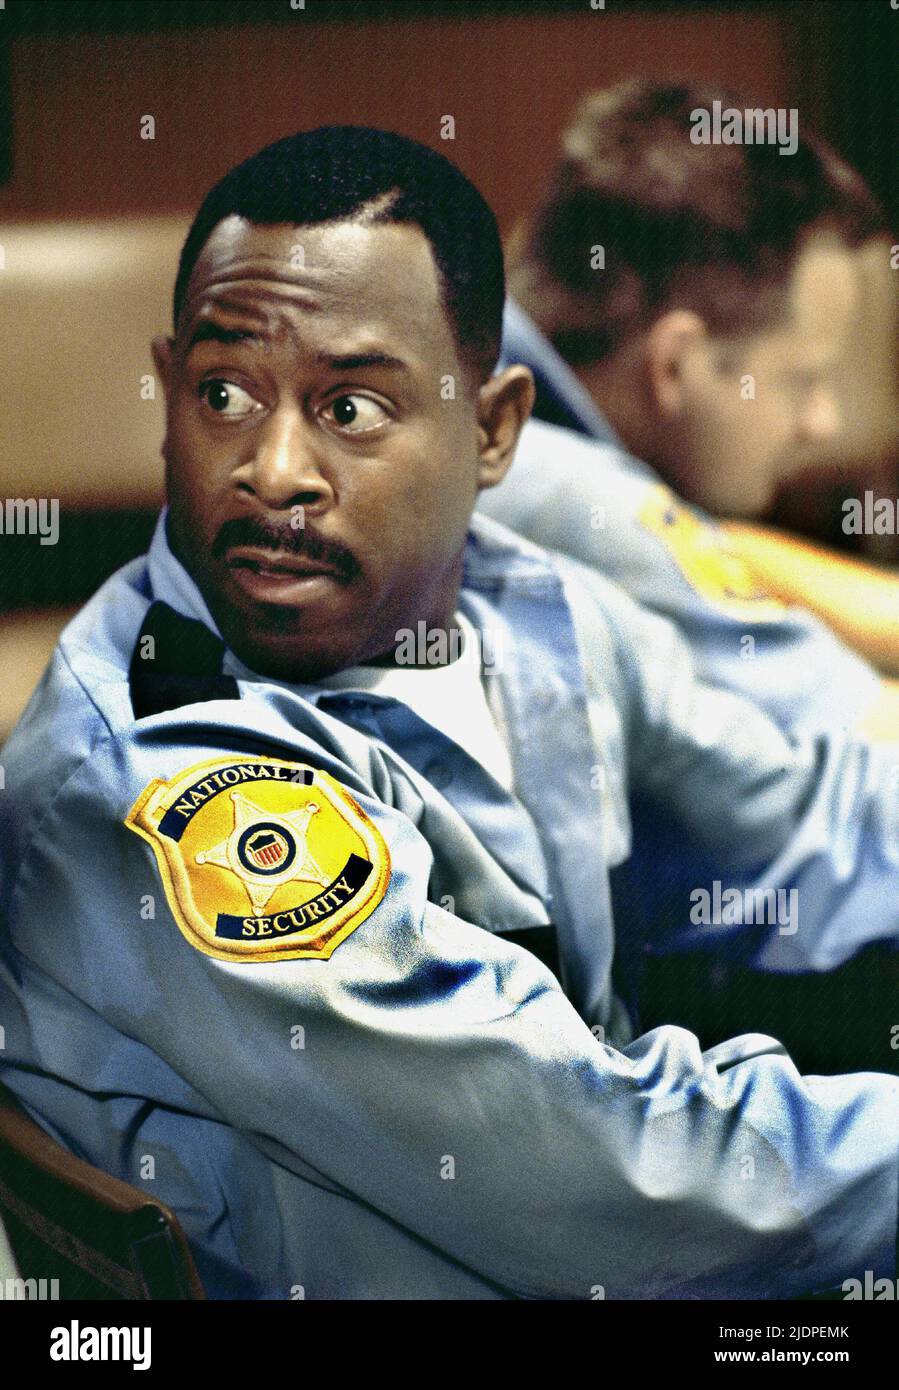 MARTIN LAWRENCE, NATIONAL SECURITY, 2003 Stock Photo